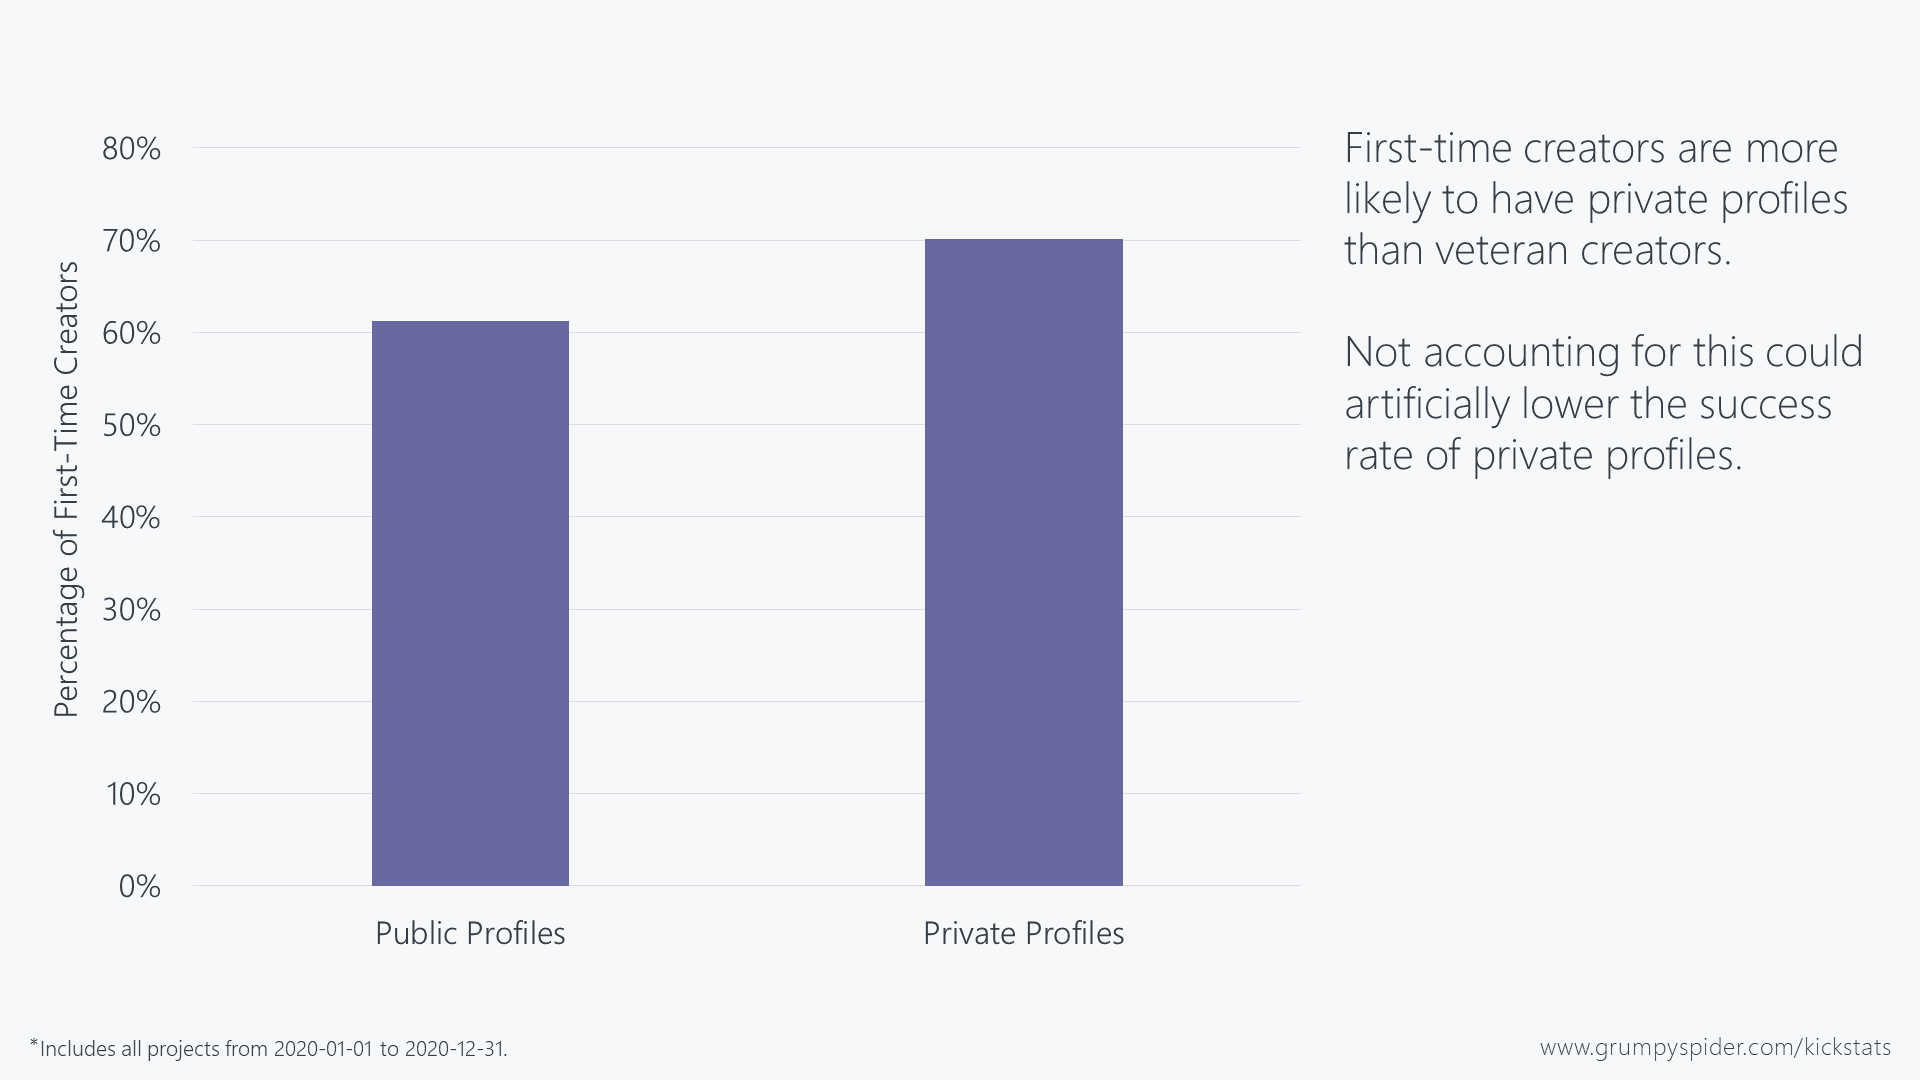 Chart showing percentage of first-time creators by public versus private profiles